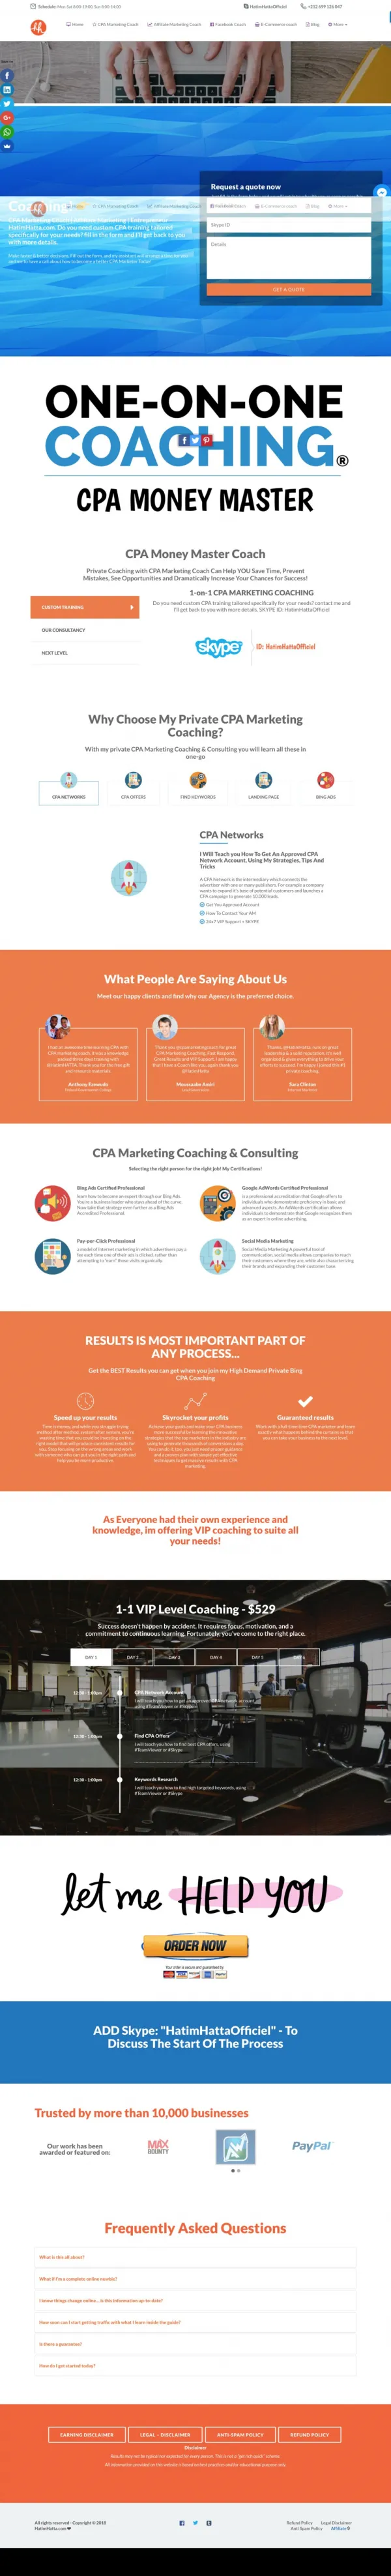 CPA MONEY MASTER (One on One Coaching)